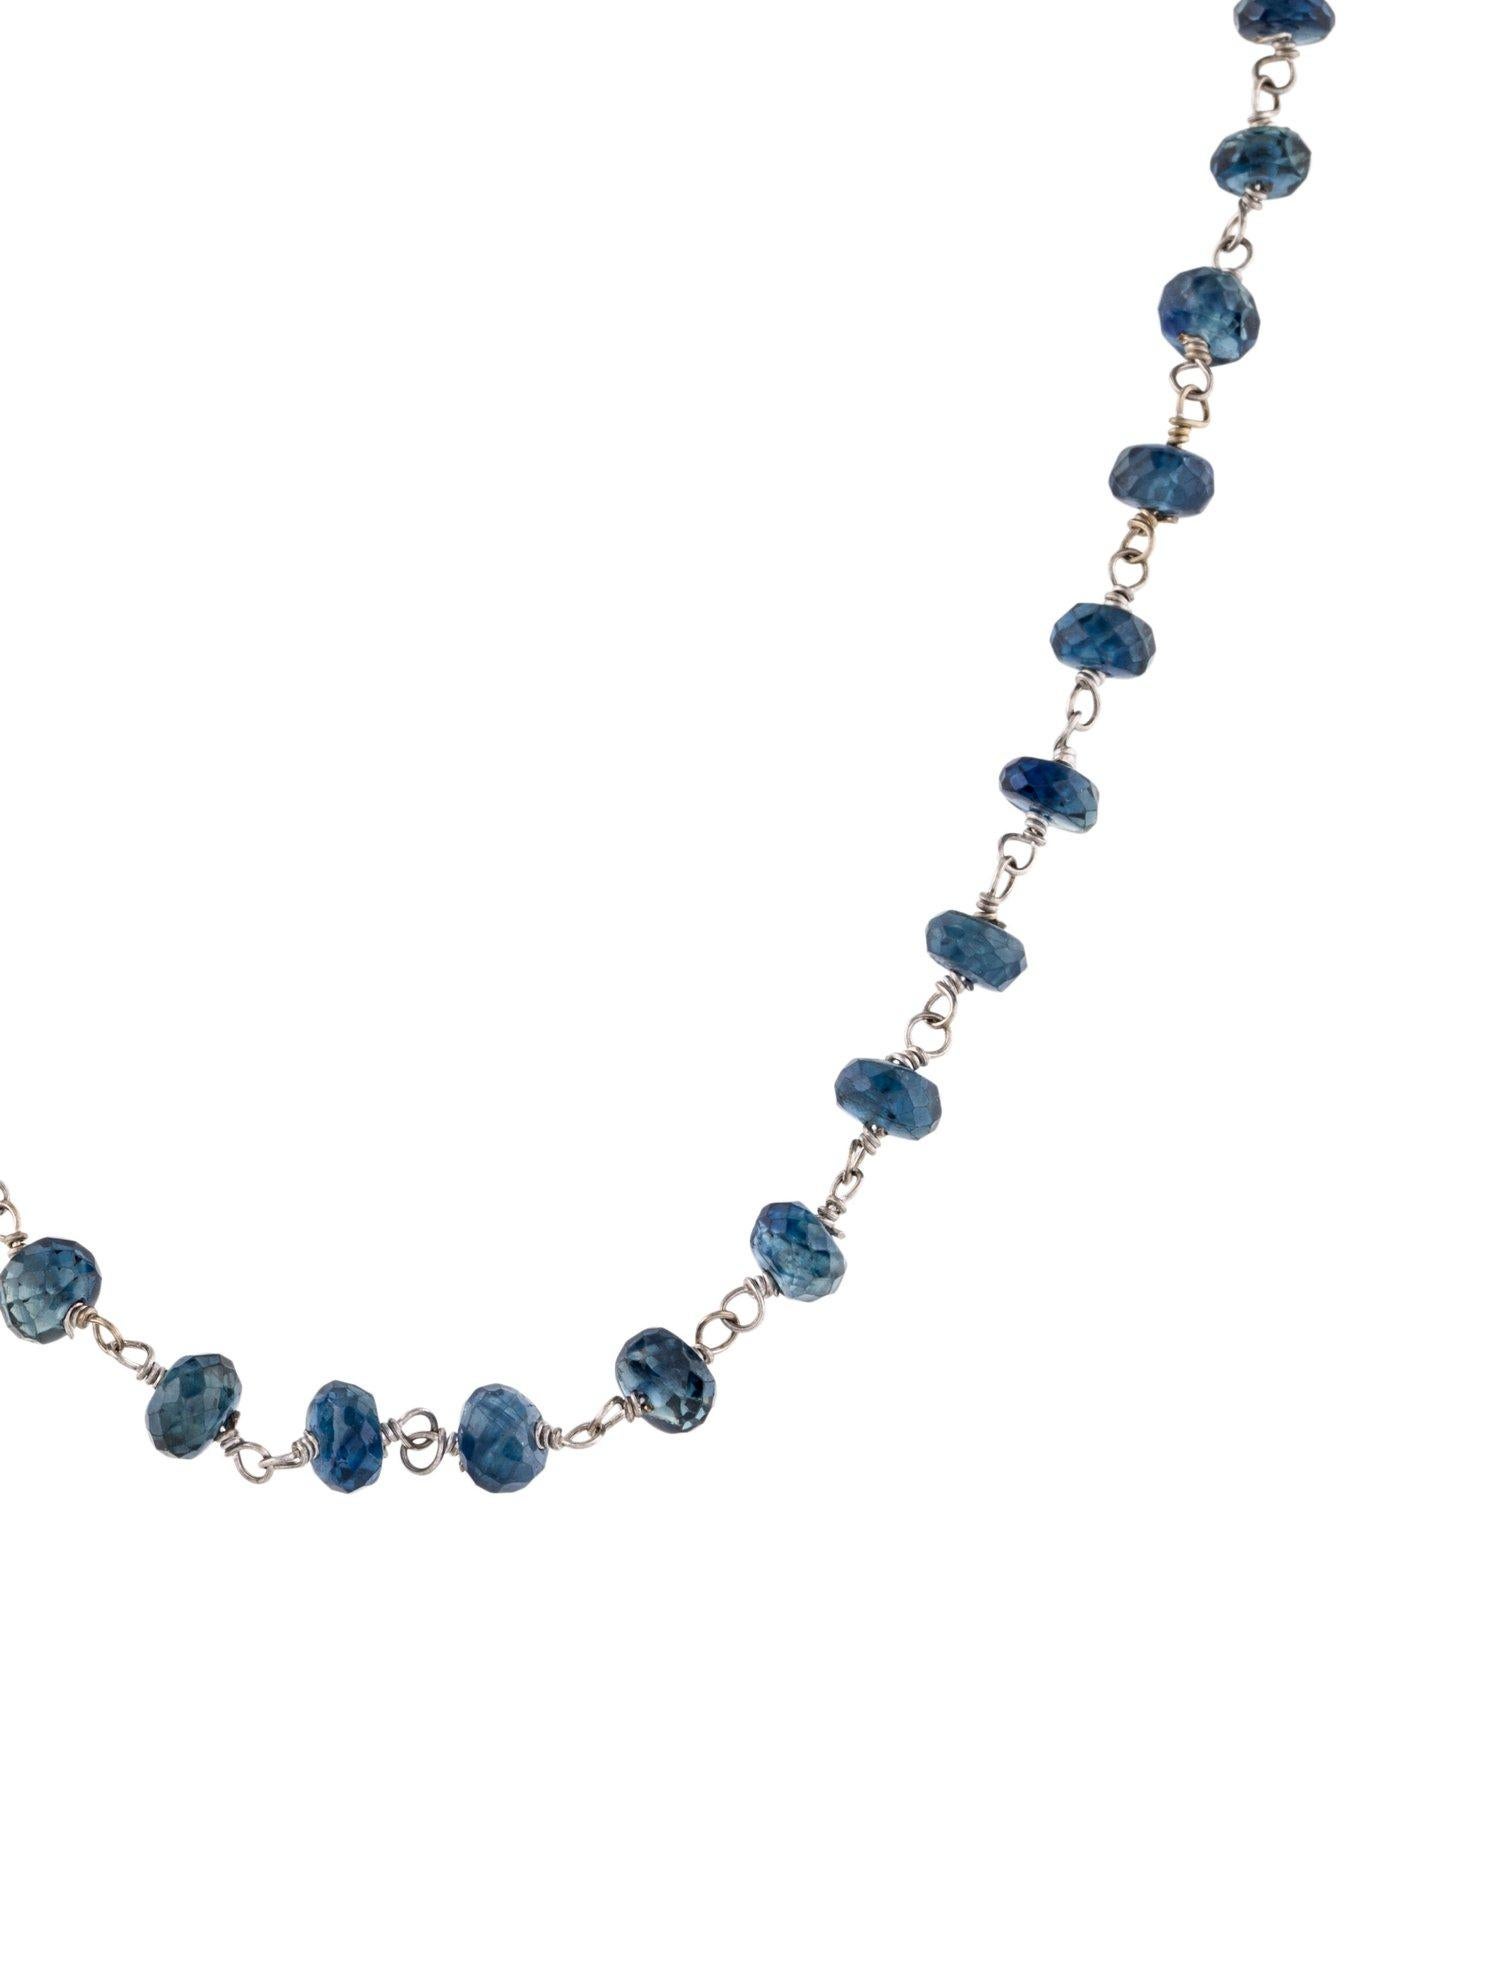 A trendy and daily wear design of blue sapphire beads wire wrapped in 14K White Gold. Carat Weight 42.28 cts. & Length 18